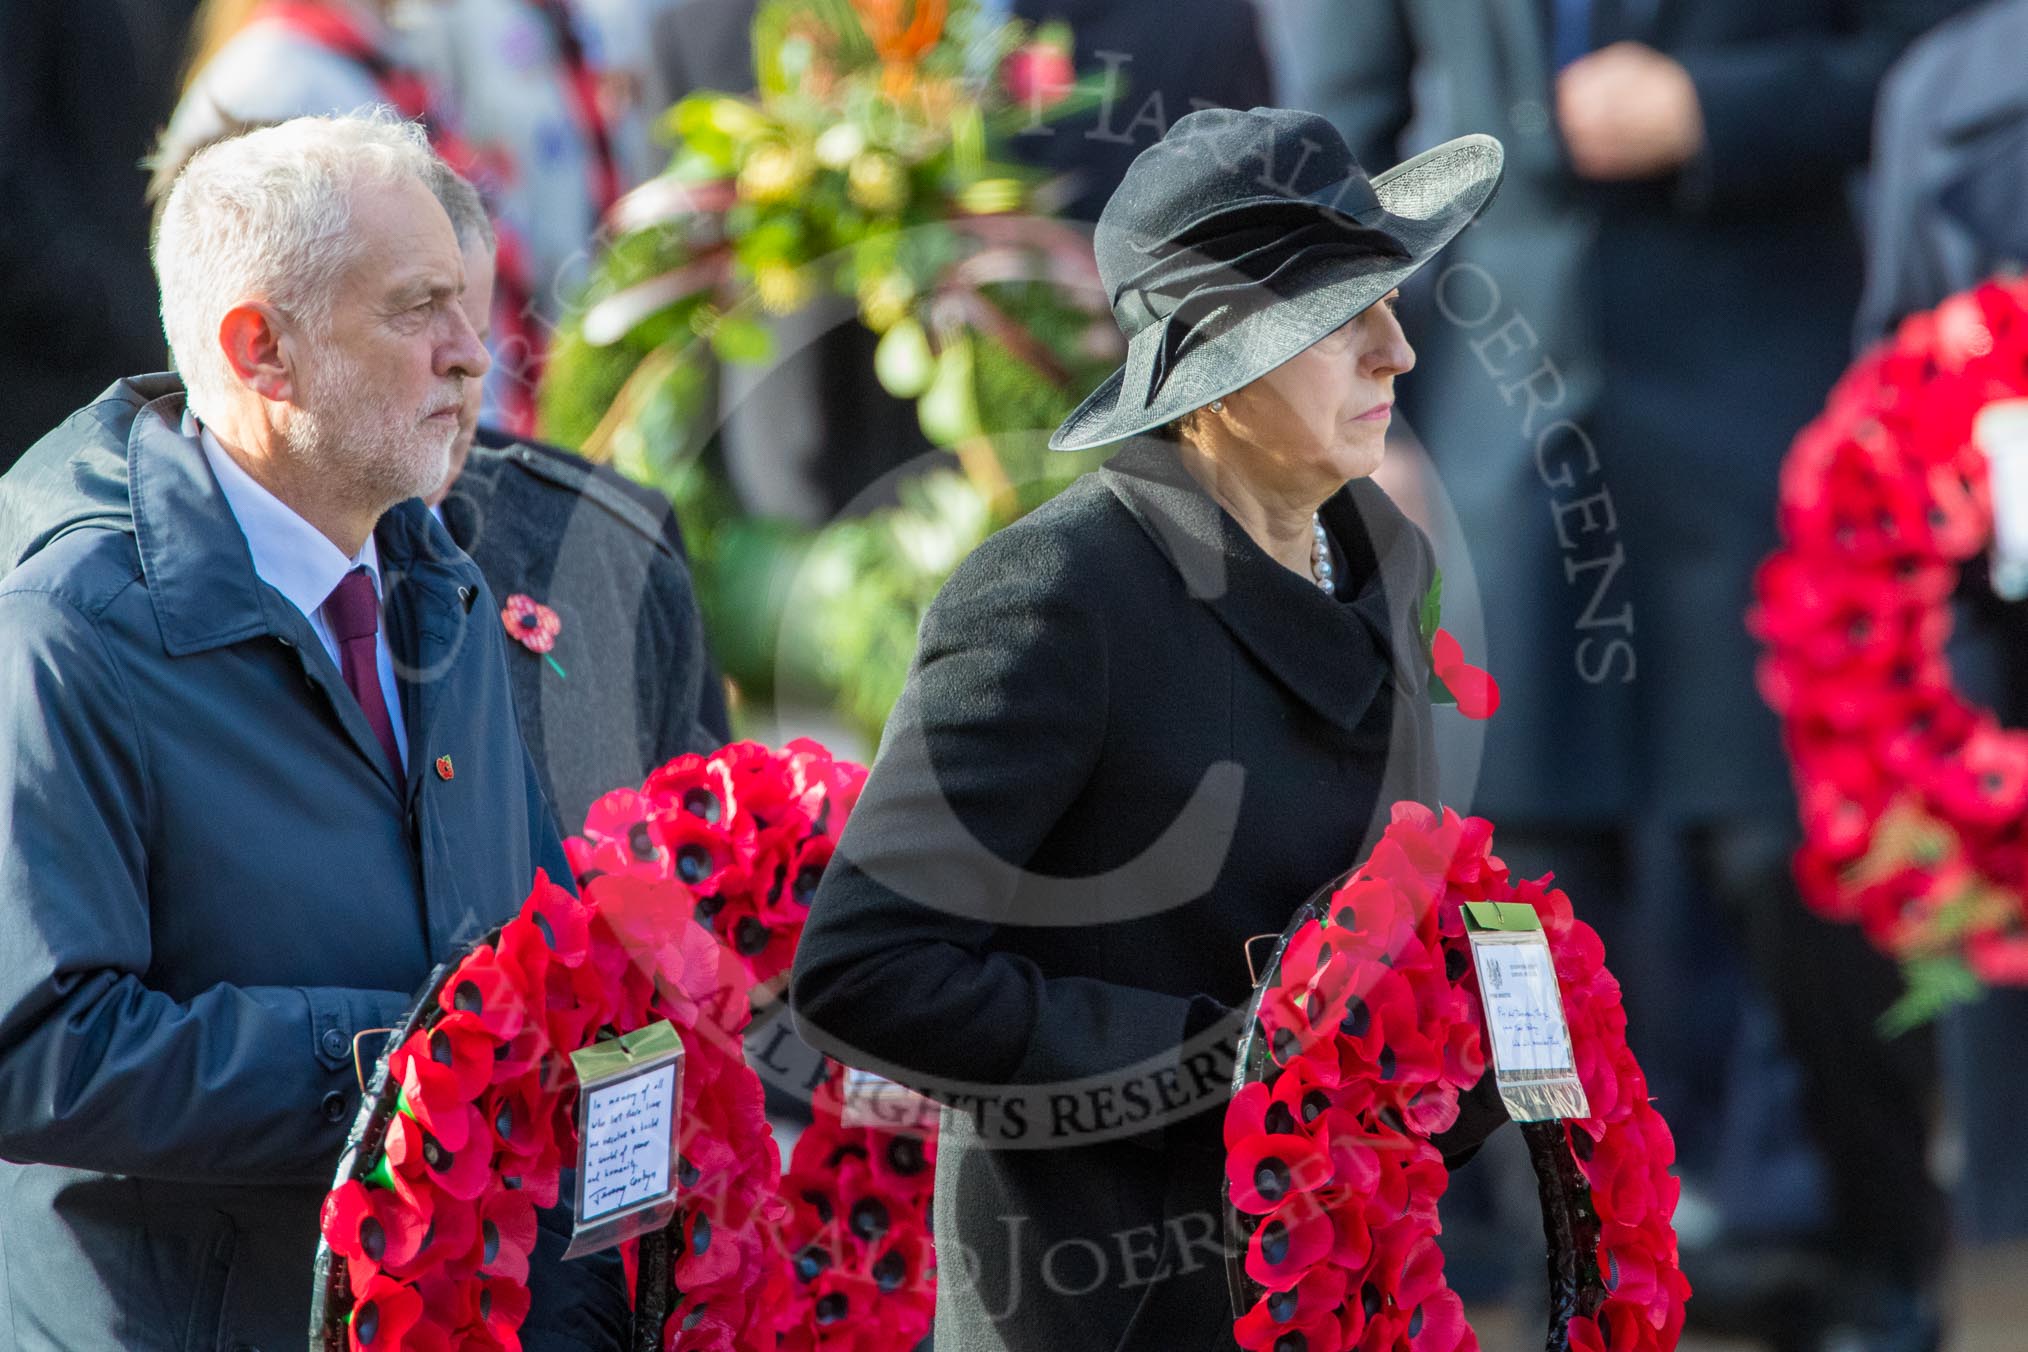 The Rt Hon Jeremy Corbyn MP, (Leader of the Labour Party and Leader of the Opposition)   and The Rt Hon Theresa May MP, Prime Minister, on behalf of the Government with their wreaths during the Remembrance Sunday Cenotaph Ceremony 2018 at Horse Guards Parade, Westminster, London, 11 November 2018, 10:55.